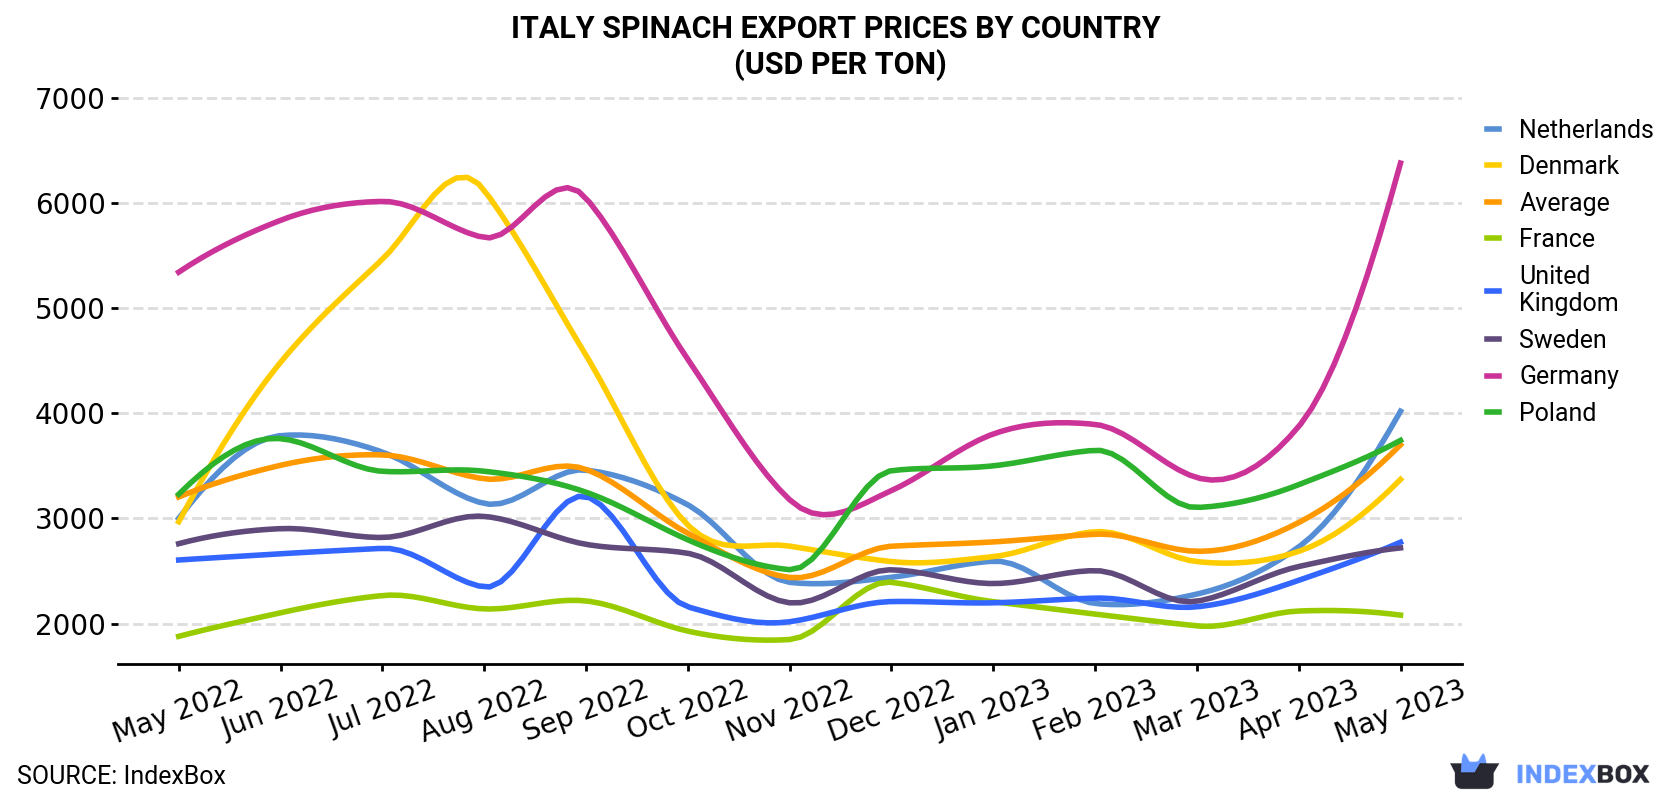 Italy Spinach Export Prices By Country (USD Per Ton)